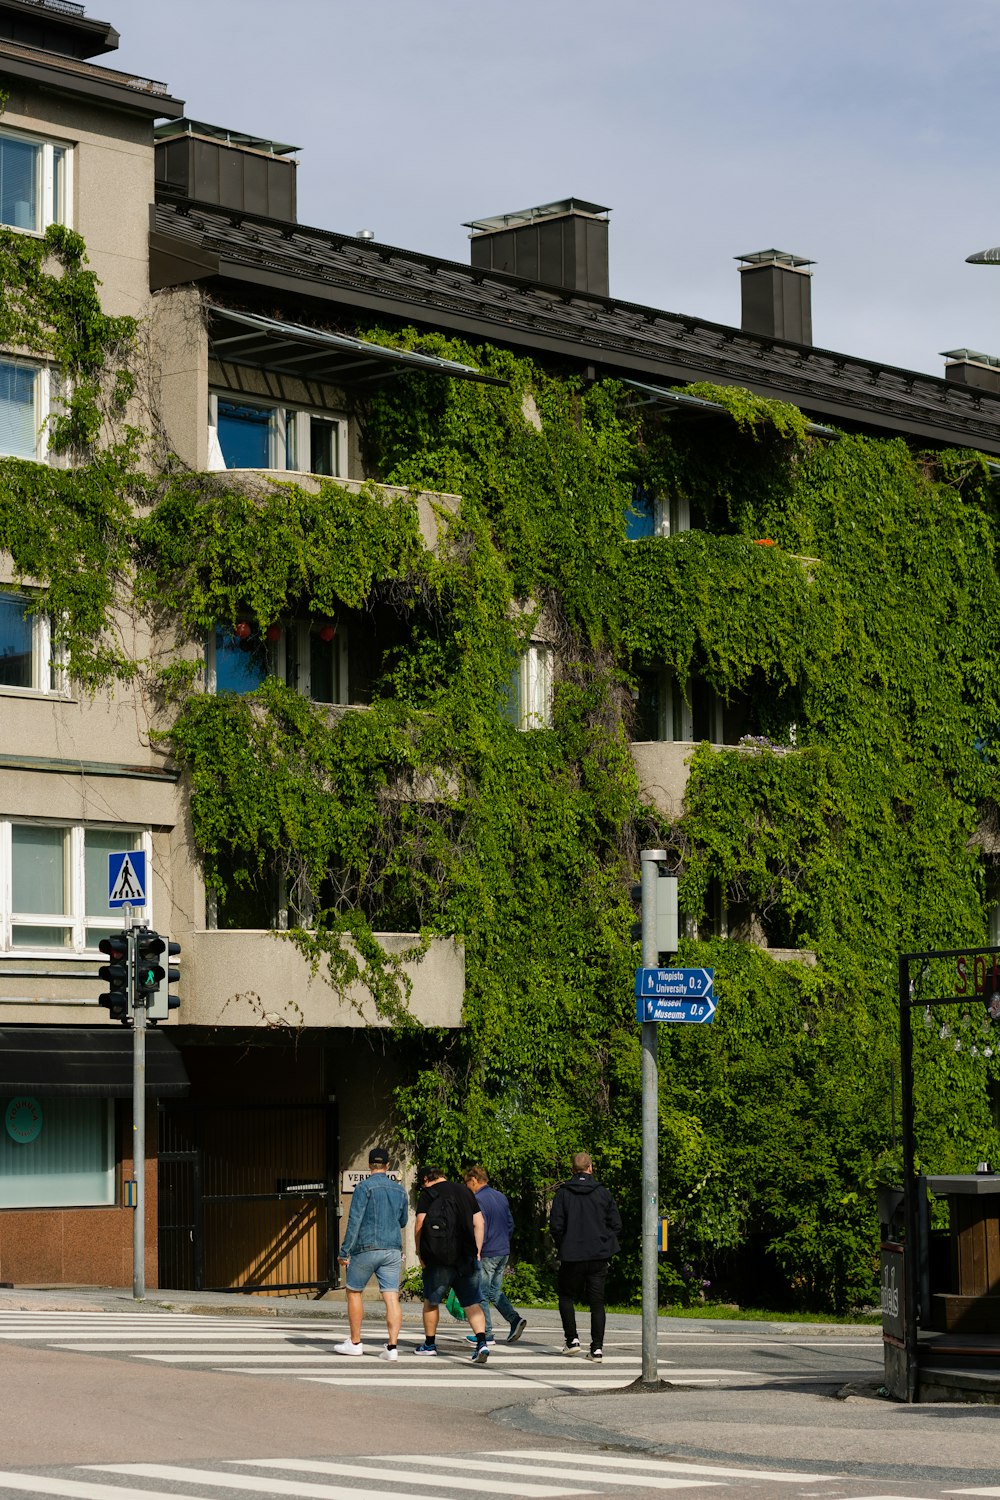 people walking on sidewalk near green trees and buildings during daytime